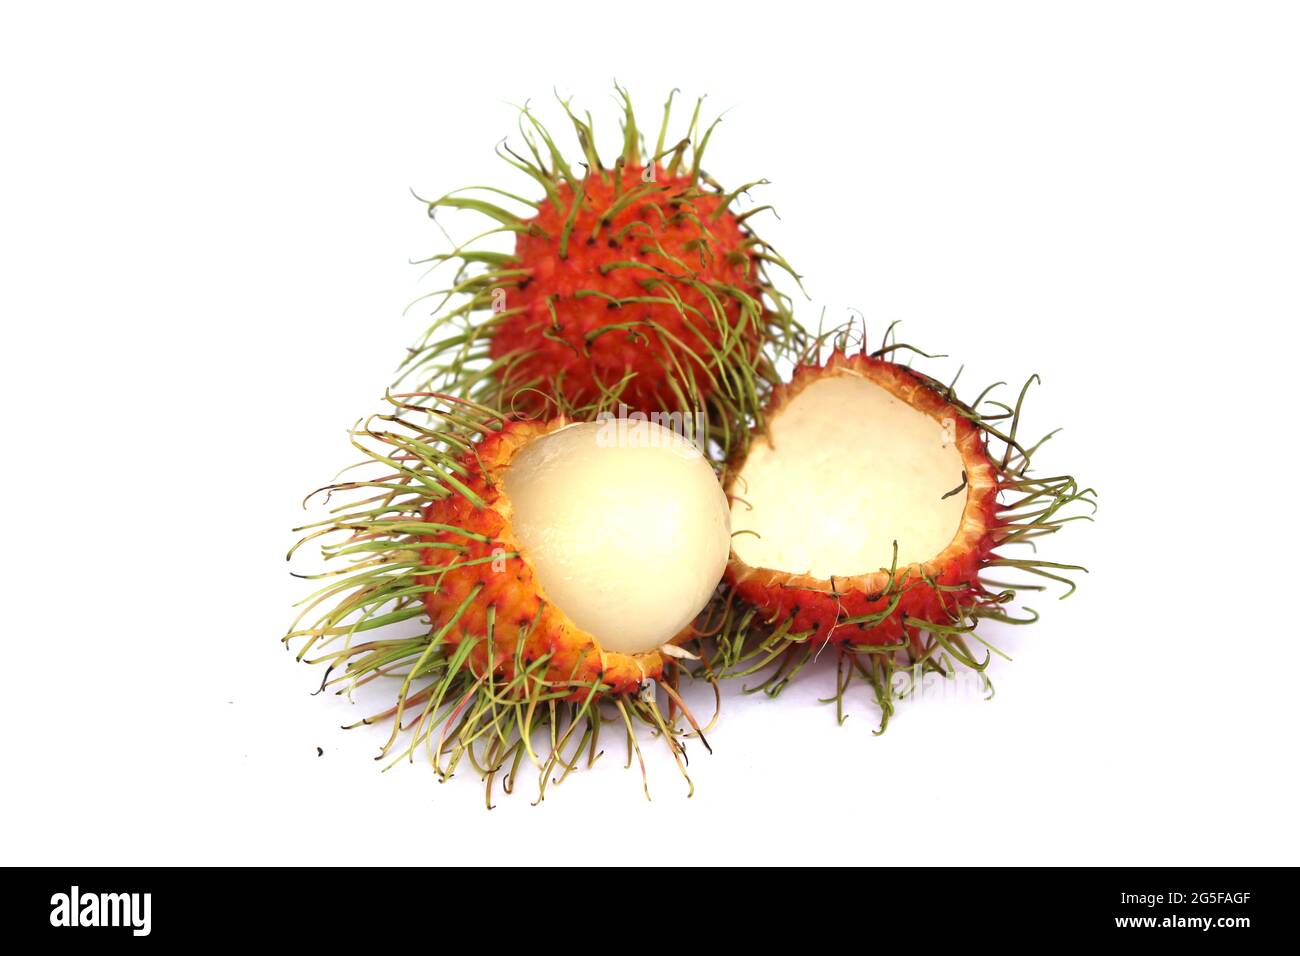 Sweet rambutan, the popular fruit of Thailand Peel off the bark to reveal the inside. isolated from a white background Stock Photo